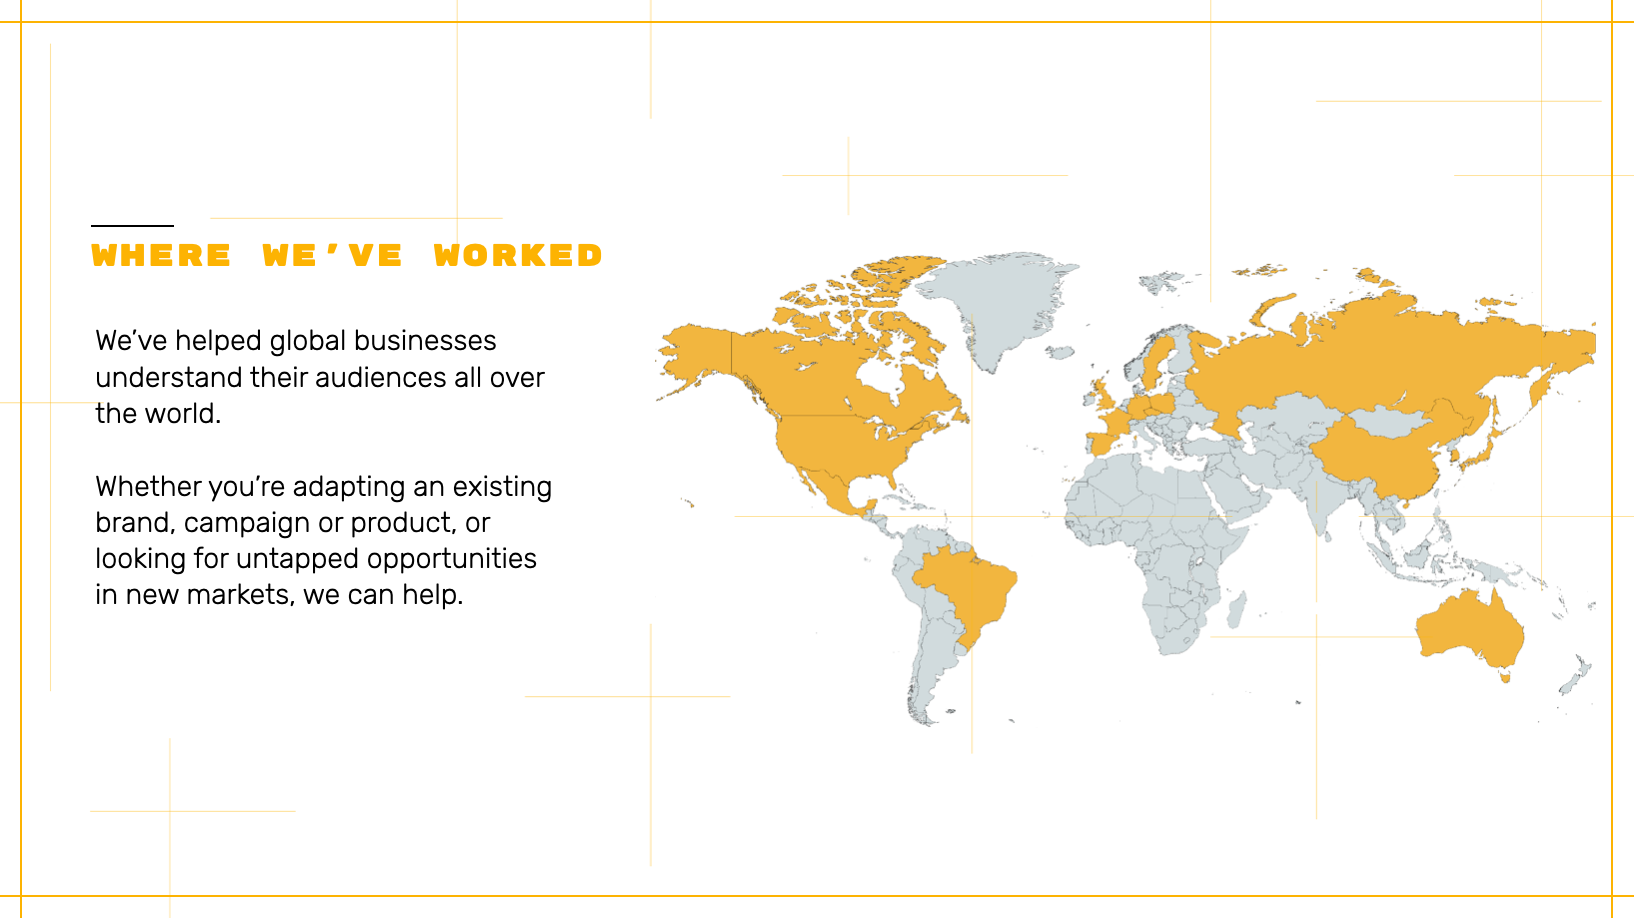 Where we've worked: we've helped global businesses understand their audience all over the world.